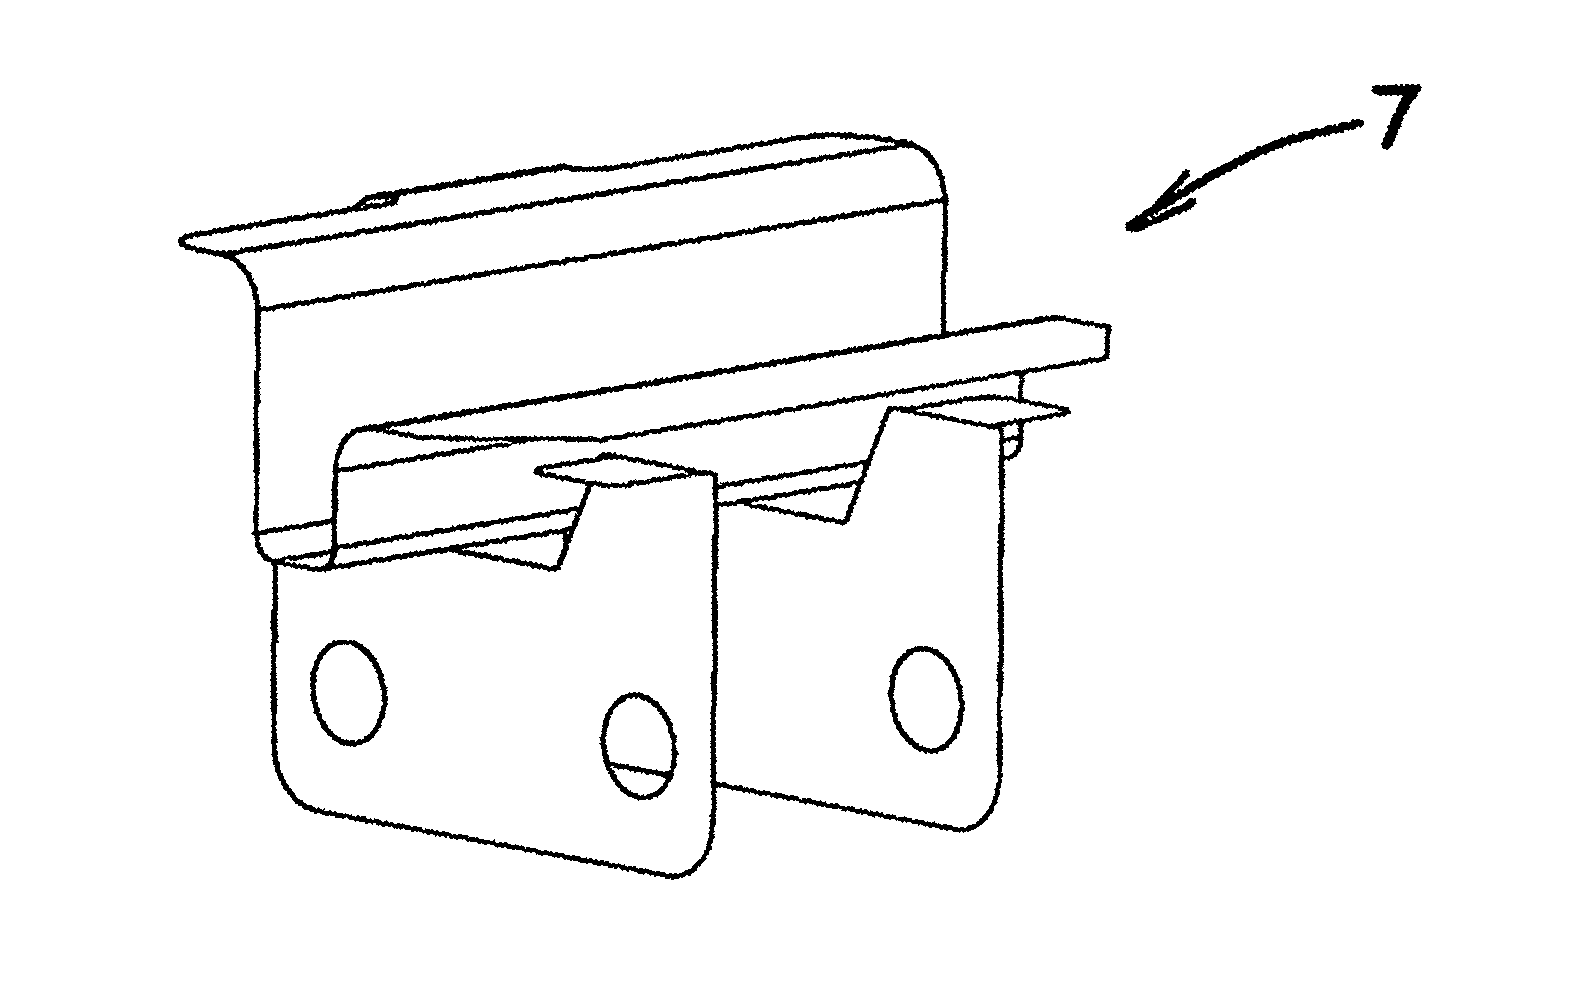 Integral load support for a jack formed of a sheet material bent to less than 180°